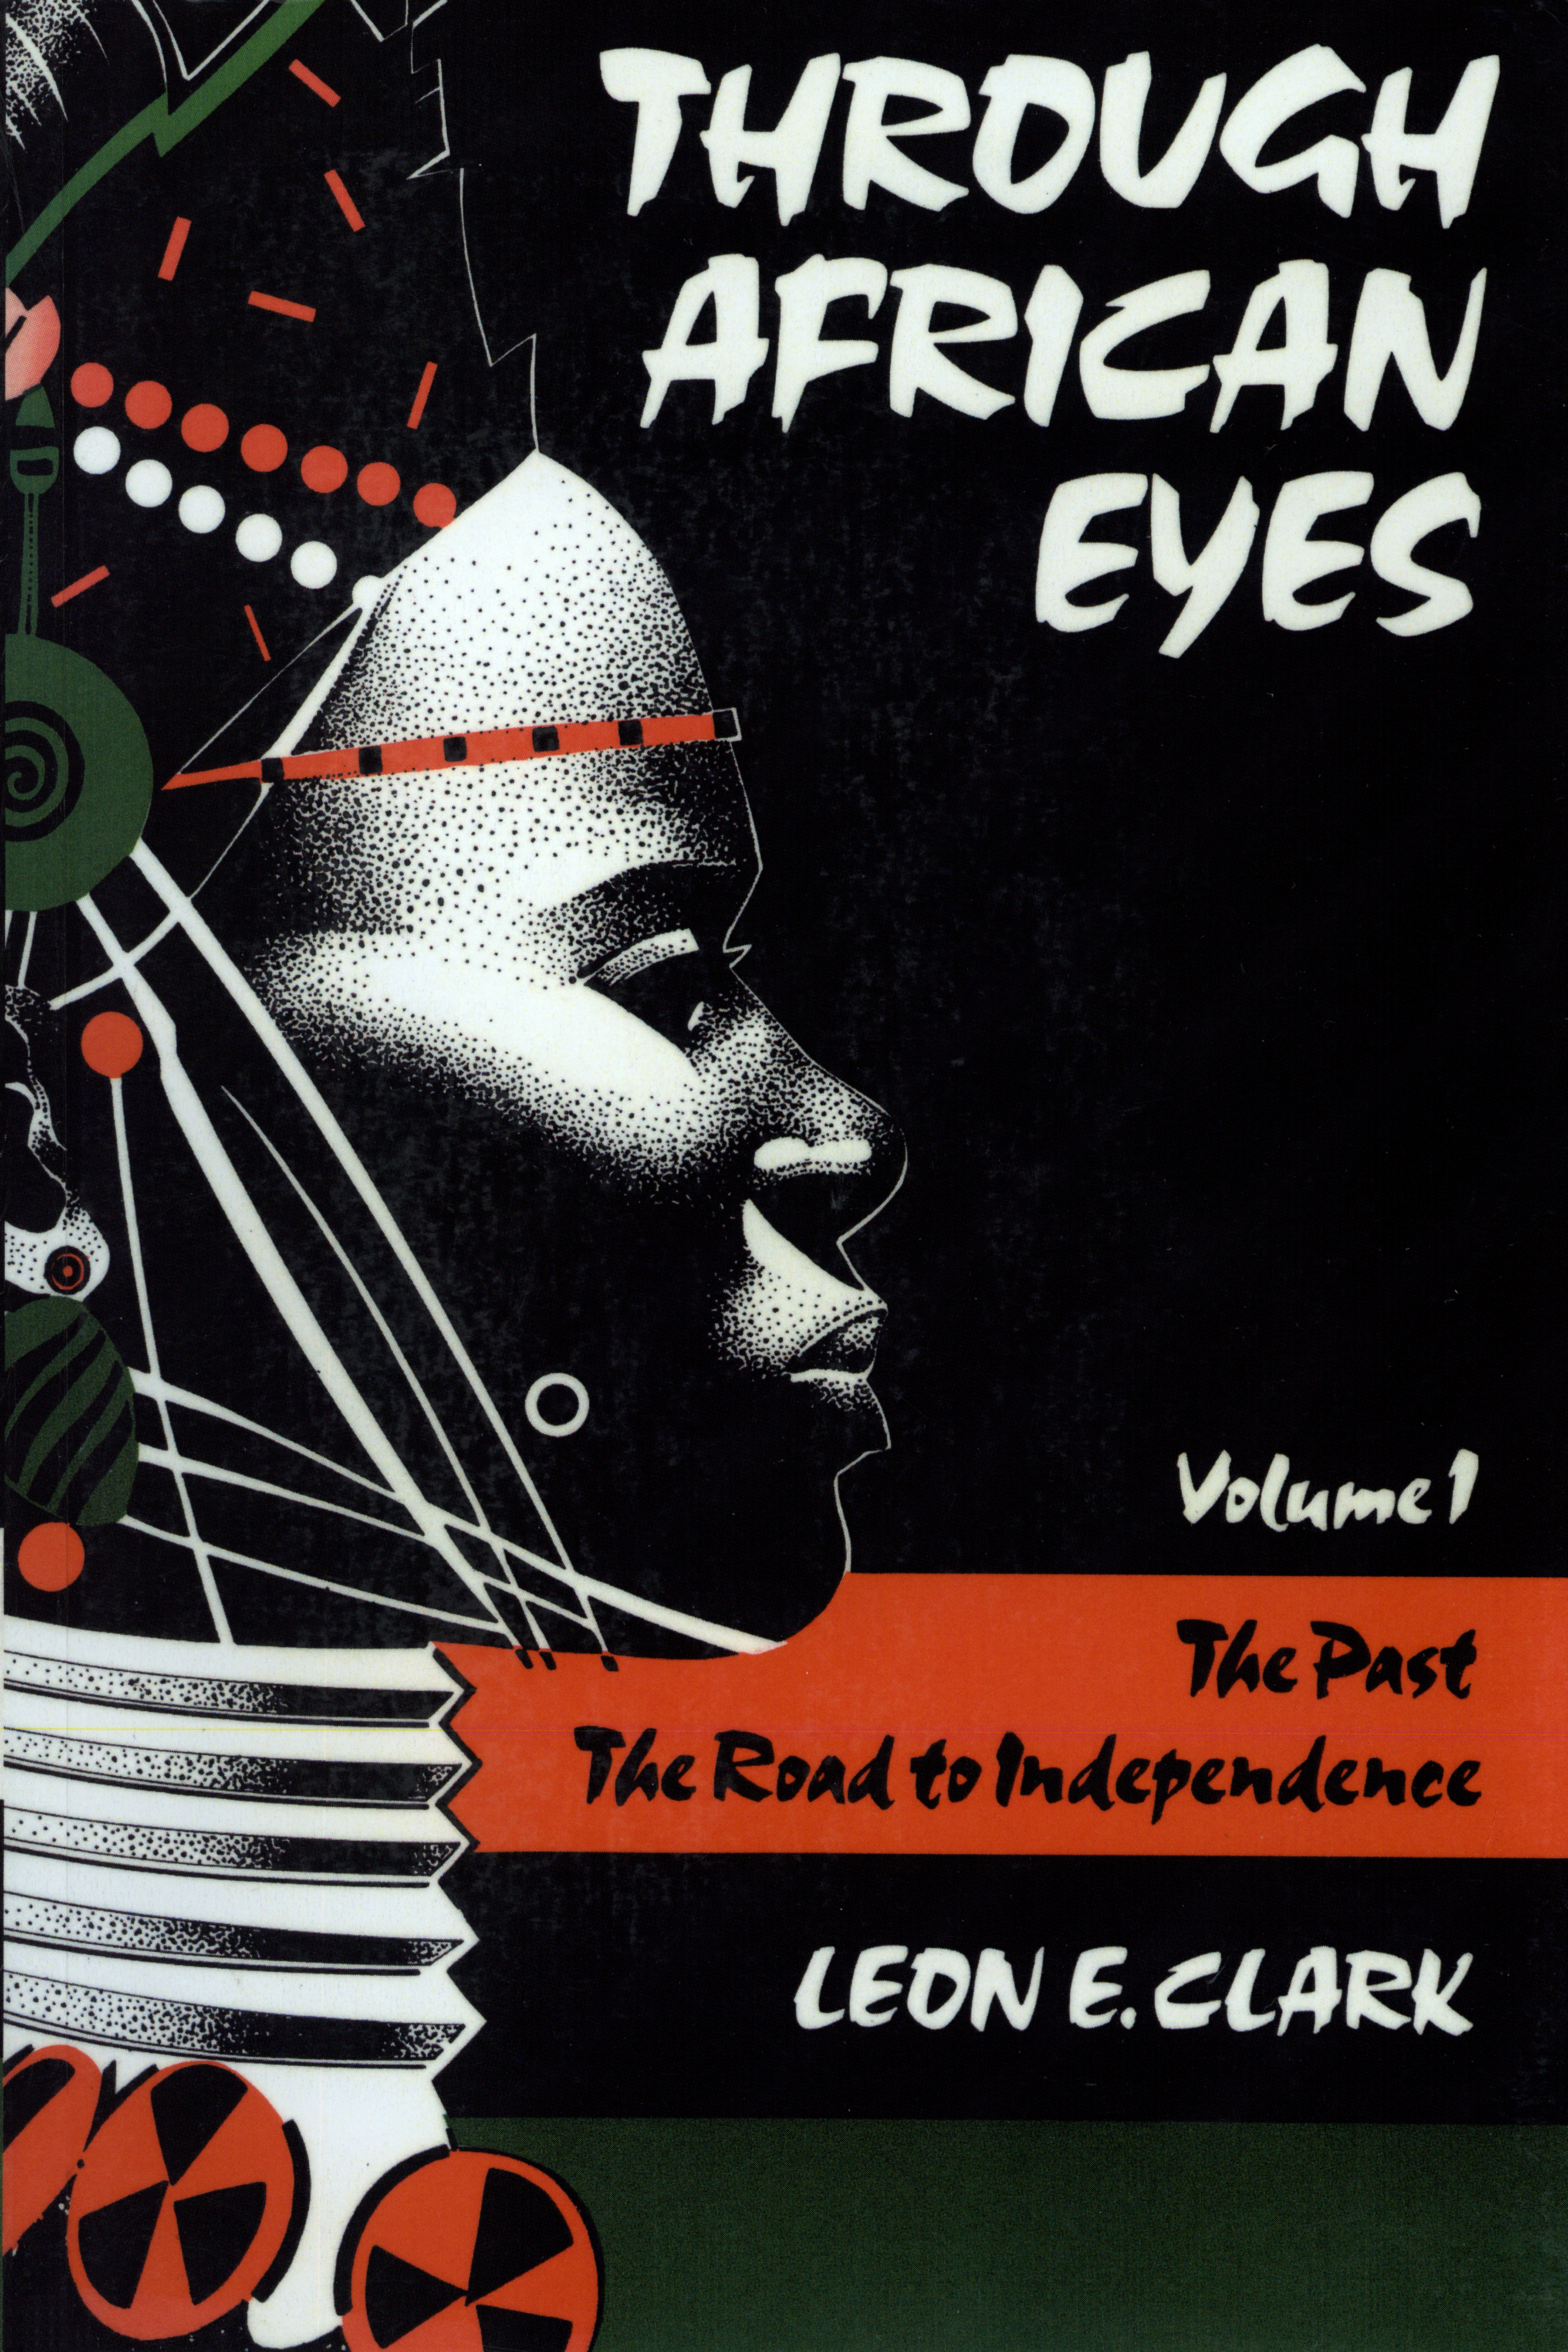 Through African Eyes: The Past, The Road to Independence